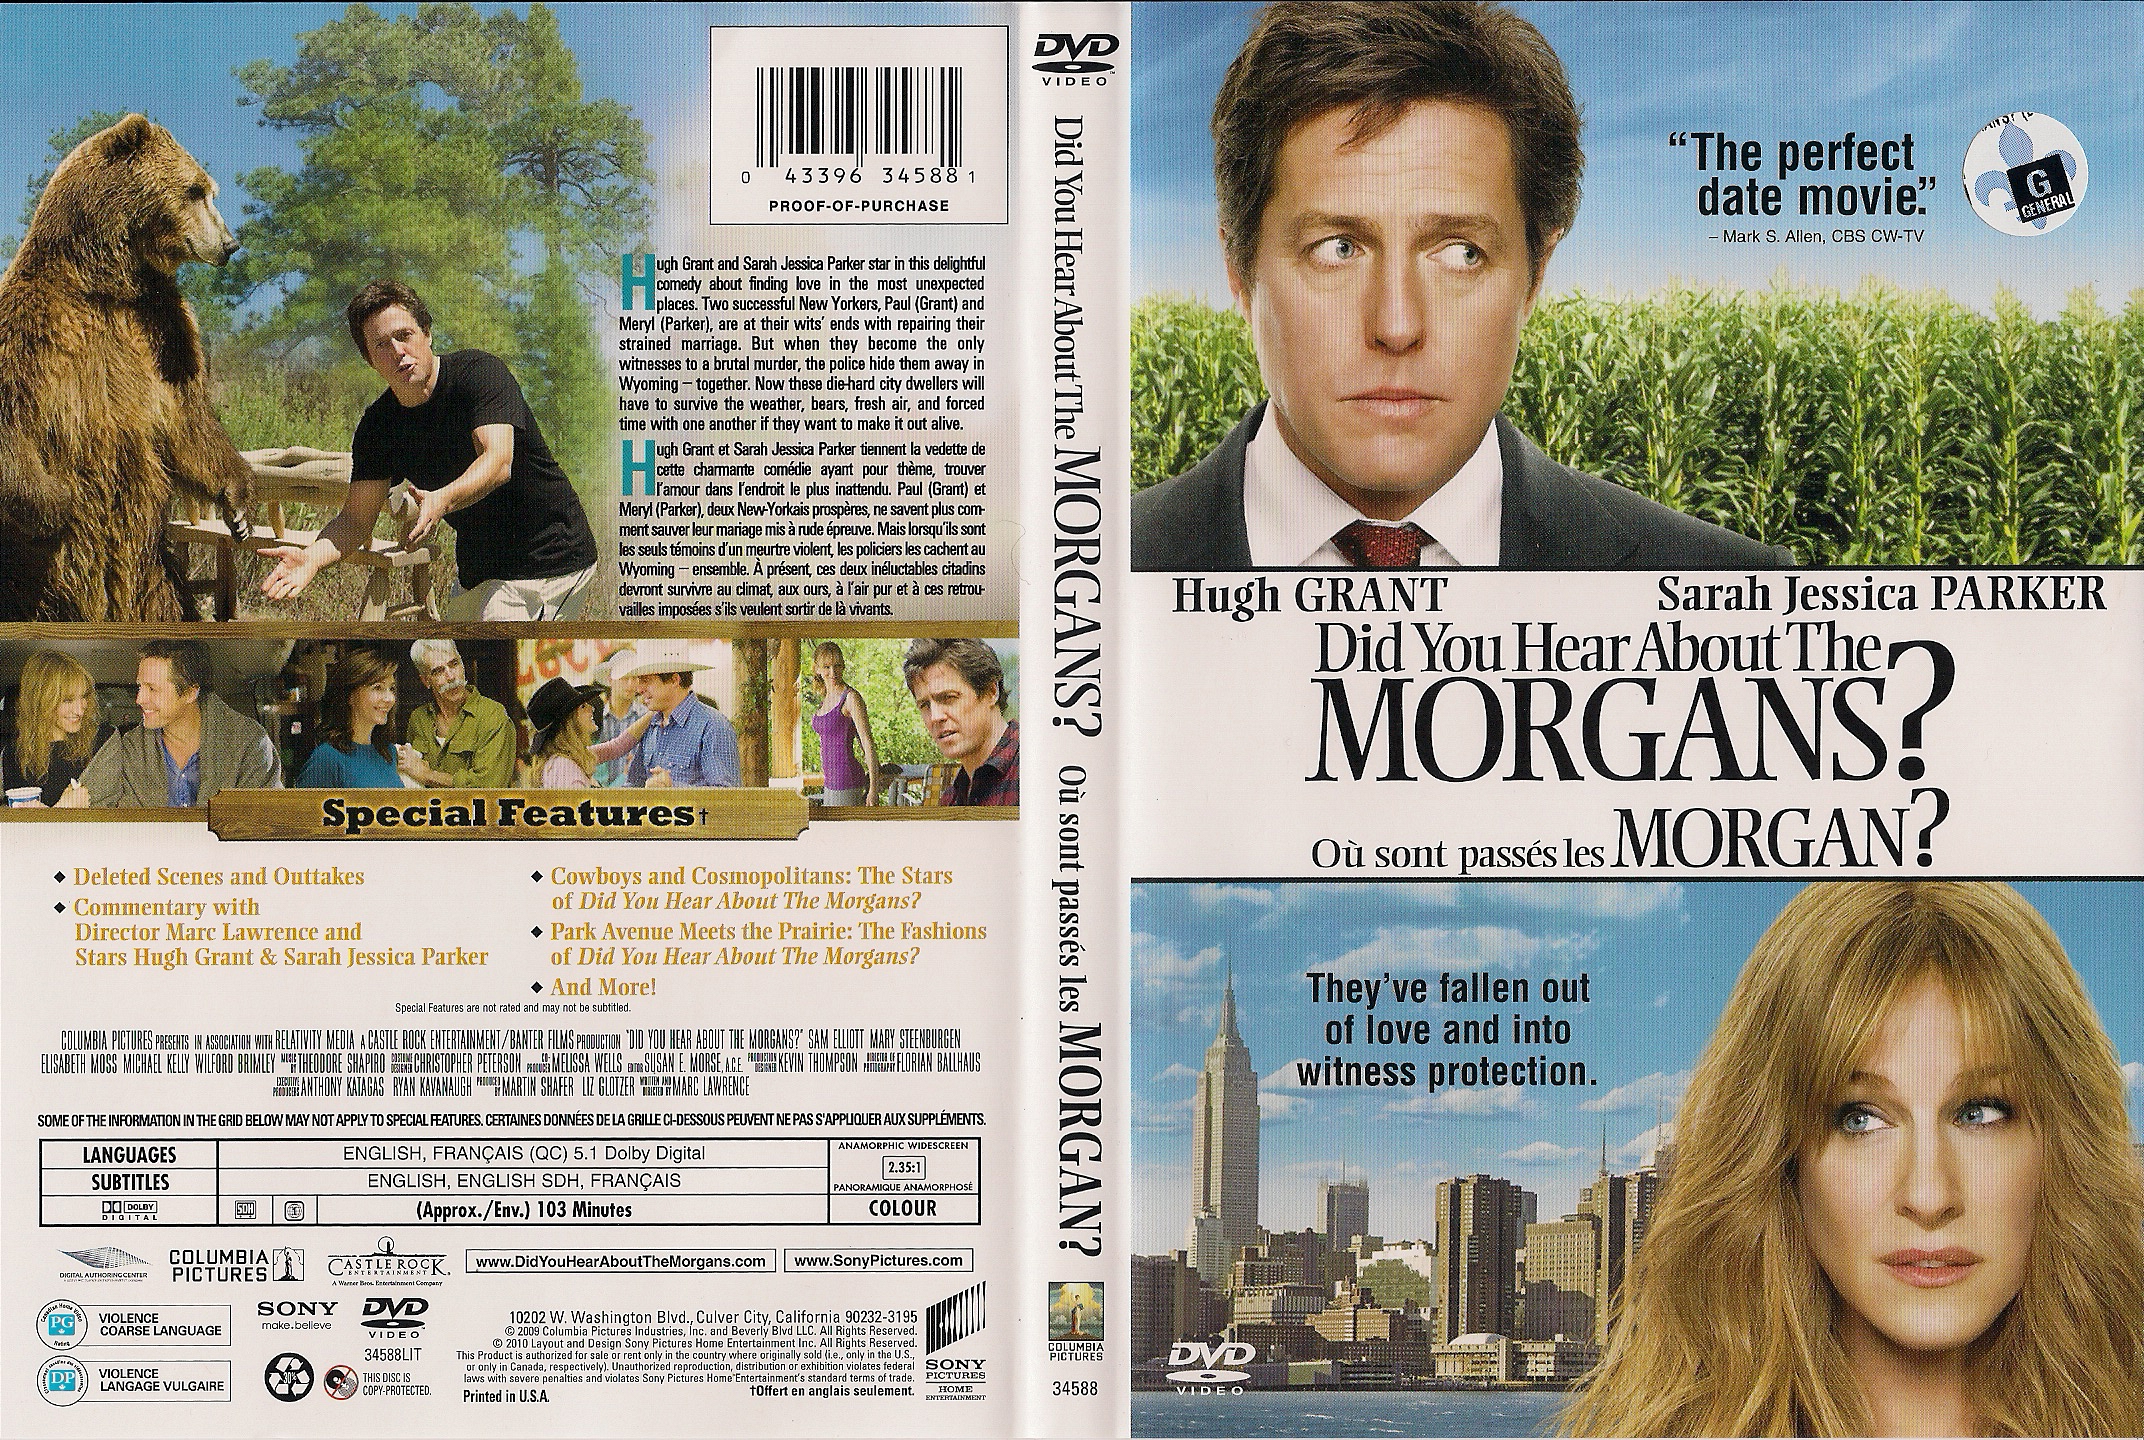 Jaquette DVD Ou sont pass les Morgan - Did you hear about the morgan (Canadienne)